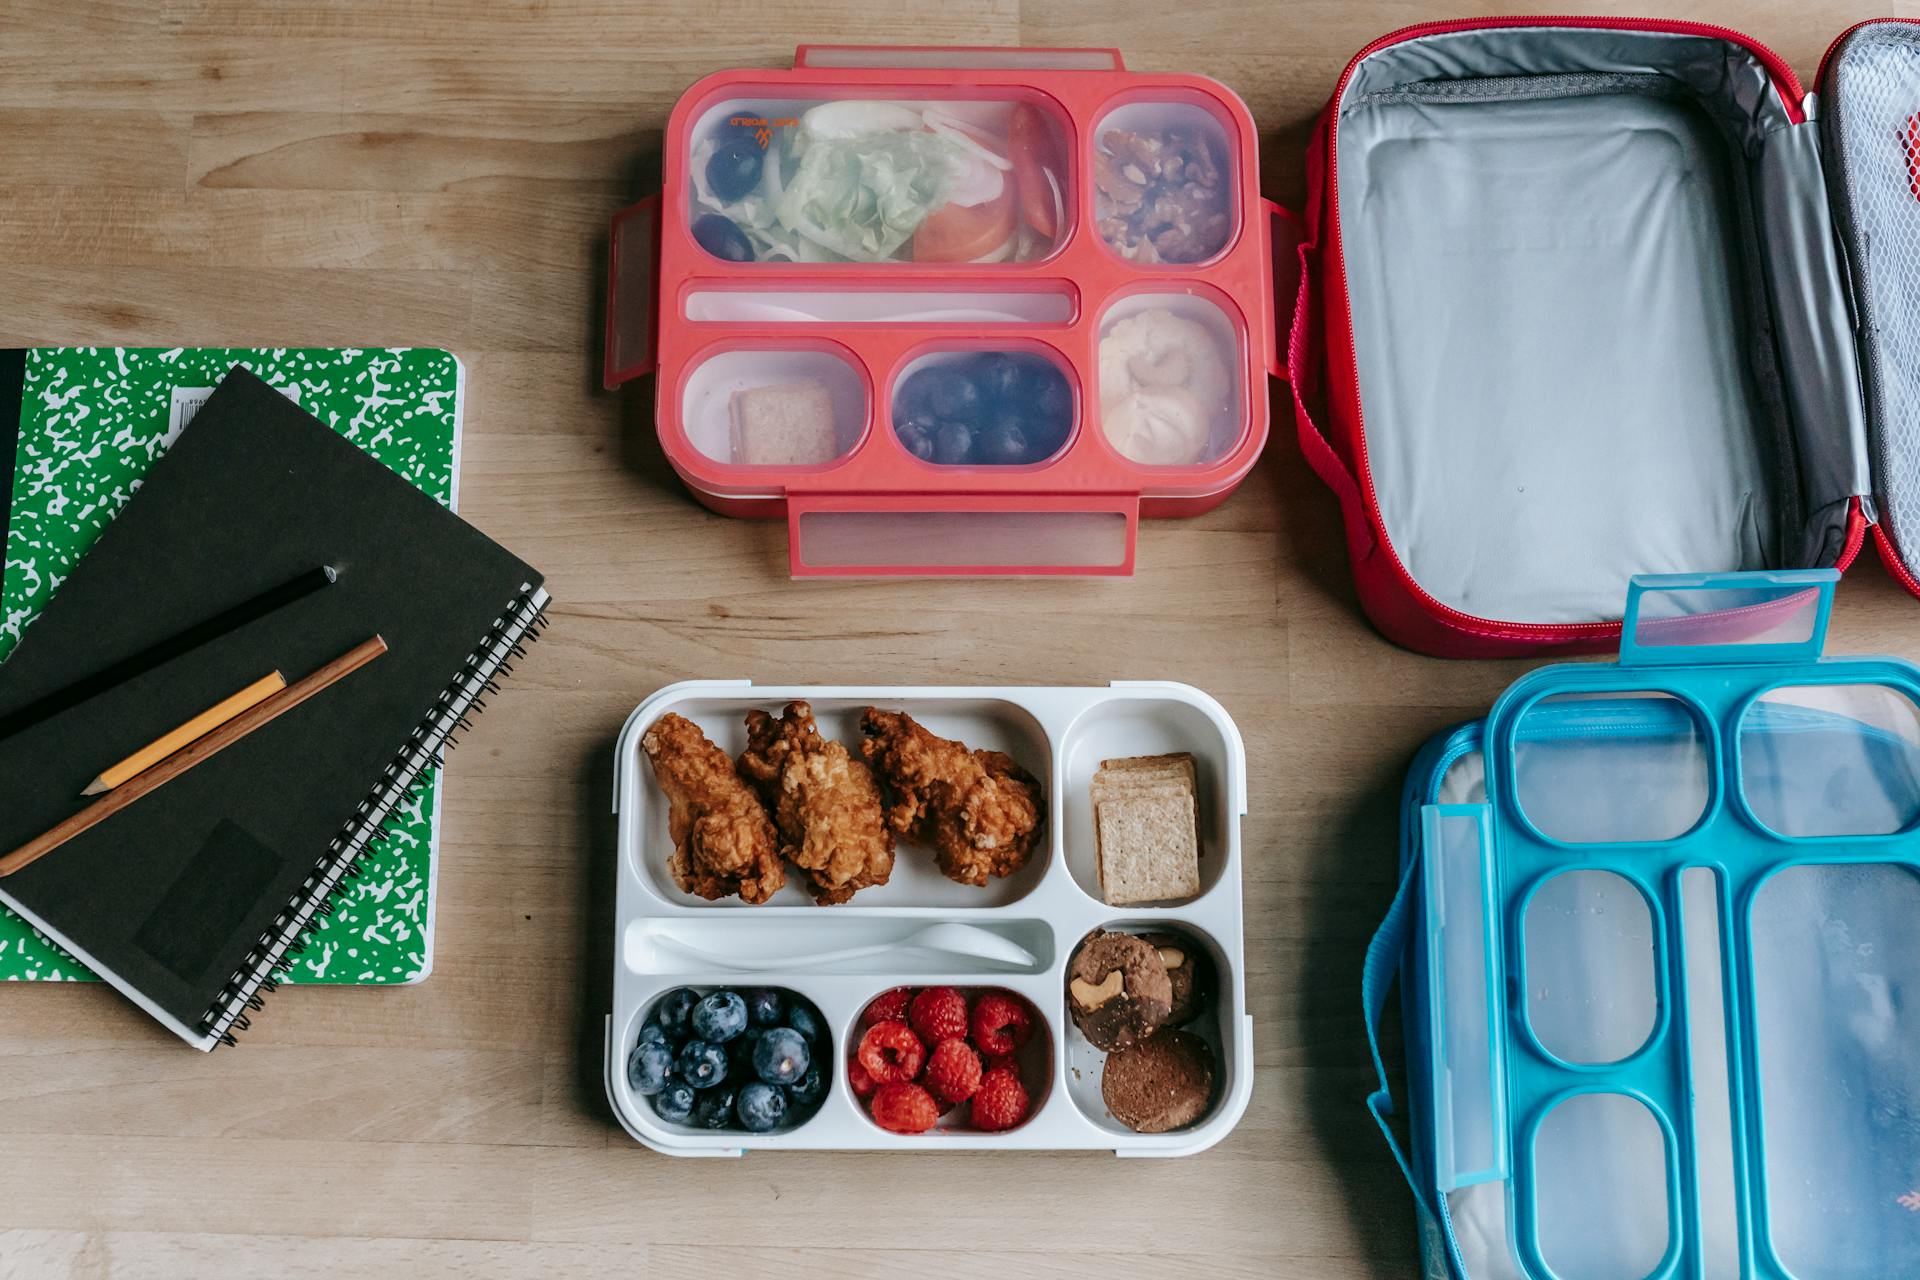 Packed lunch boxes | Source: Pexels